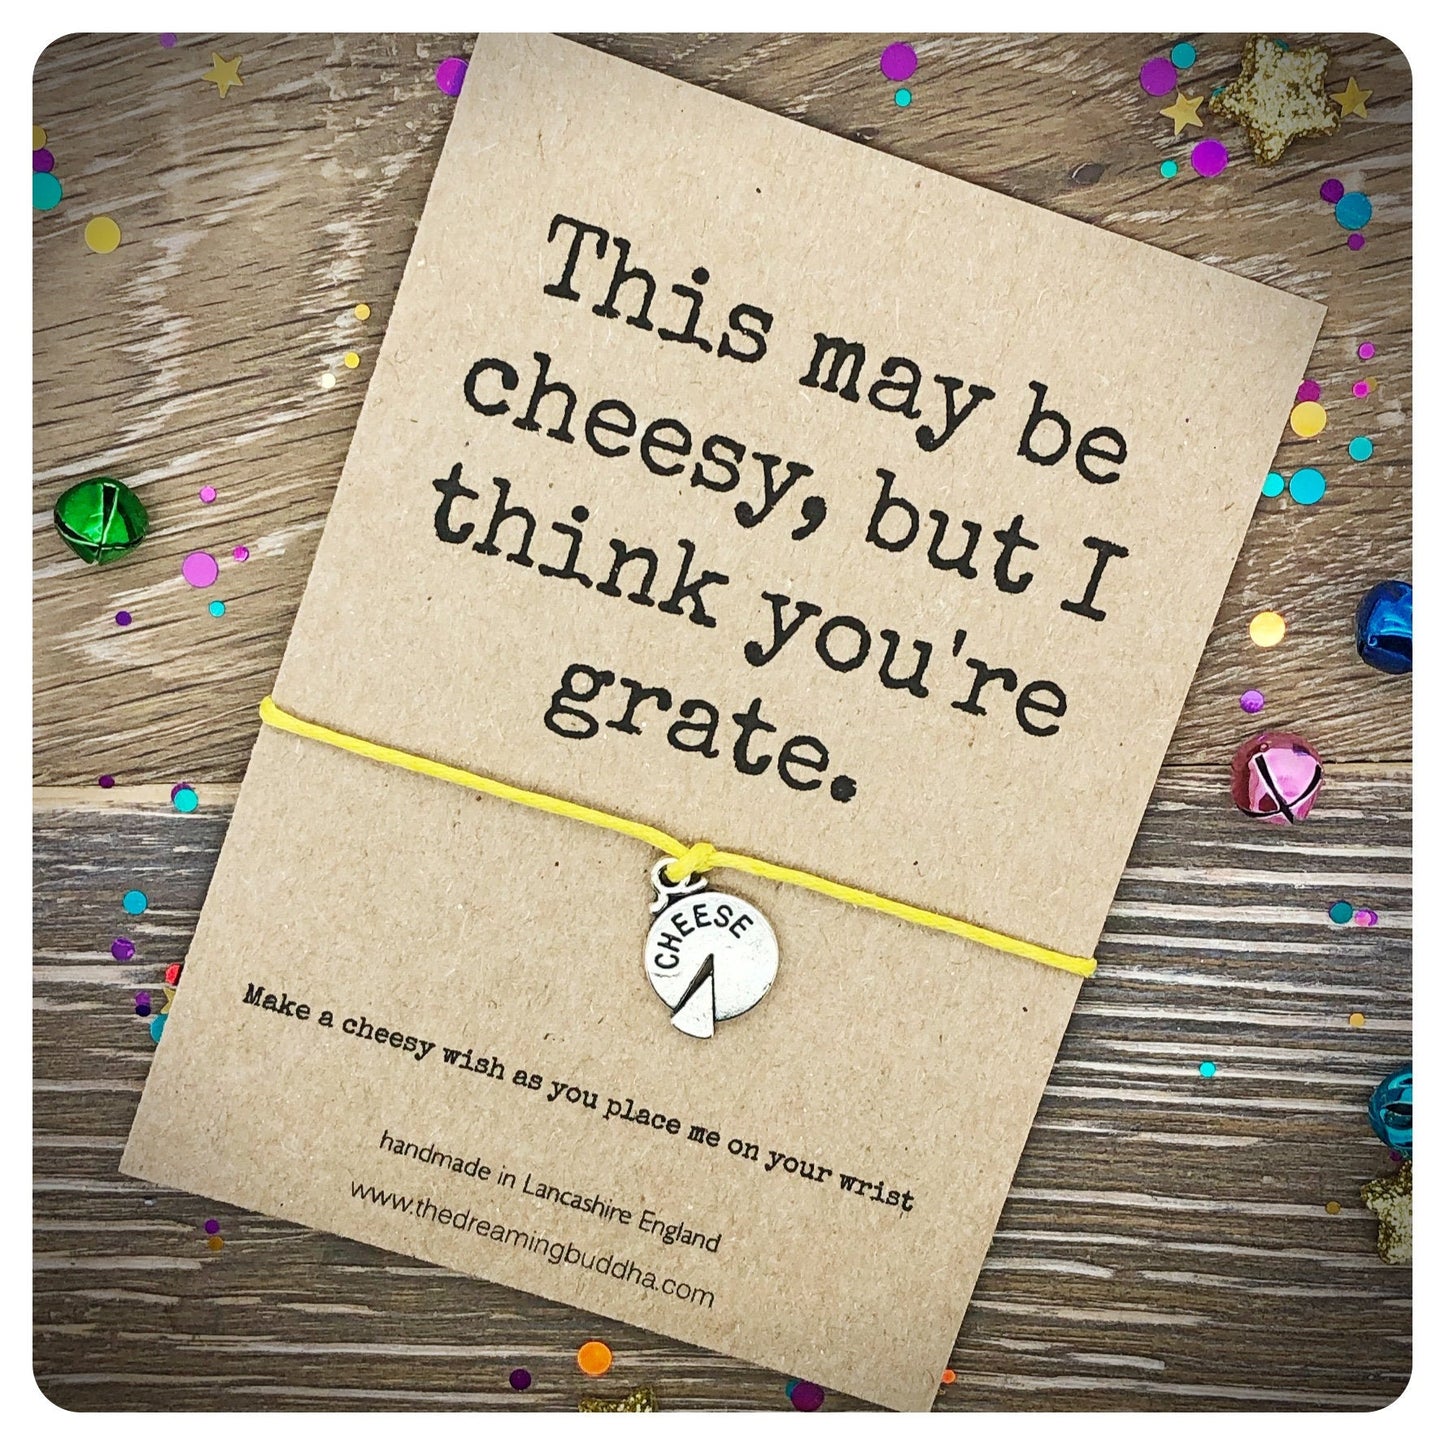 Friendship Wish Bracelet, Cheese Lover Card, Cheesy Gift, Cheddar Cheese Jewellery, Funny Wishlet